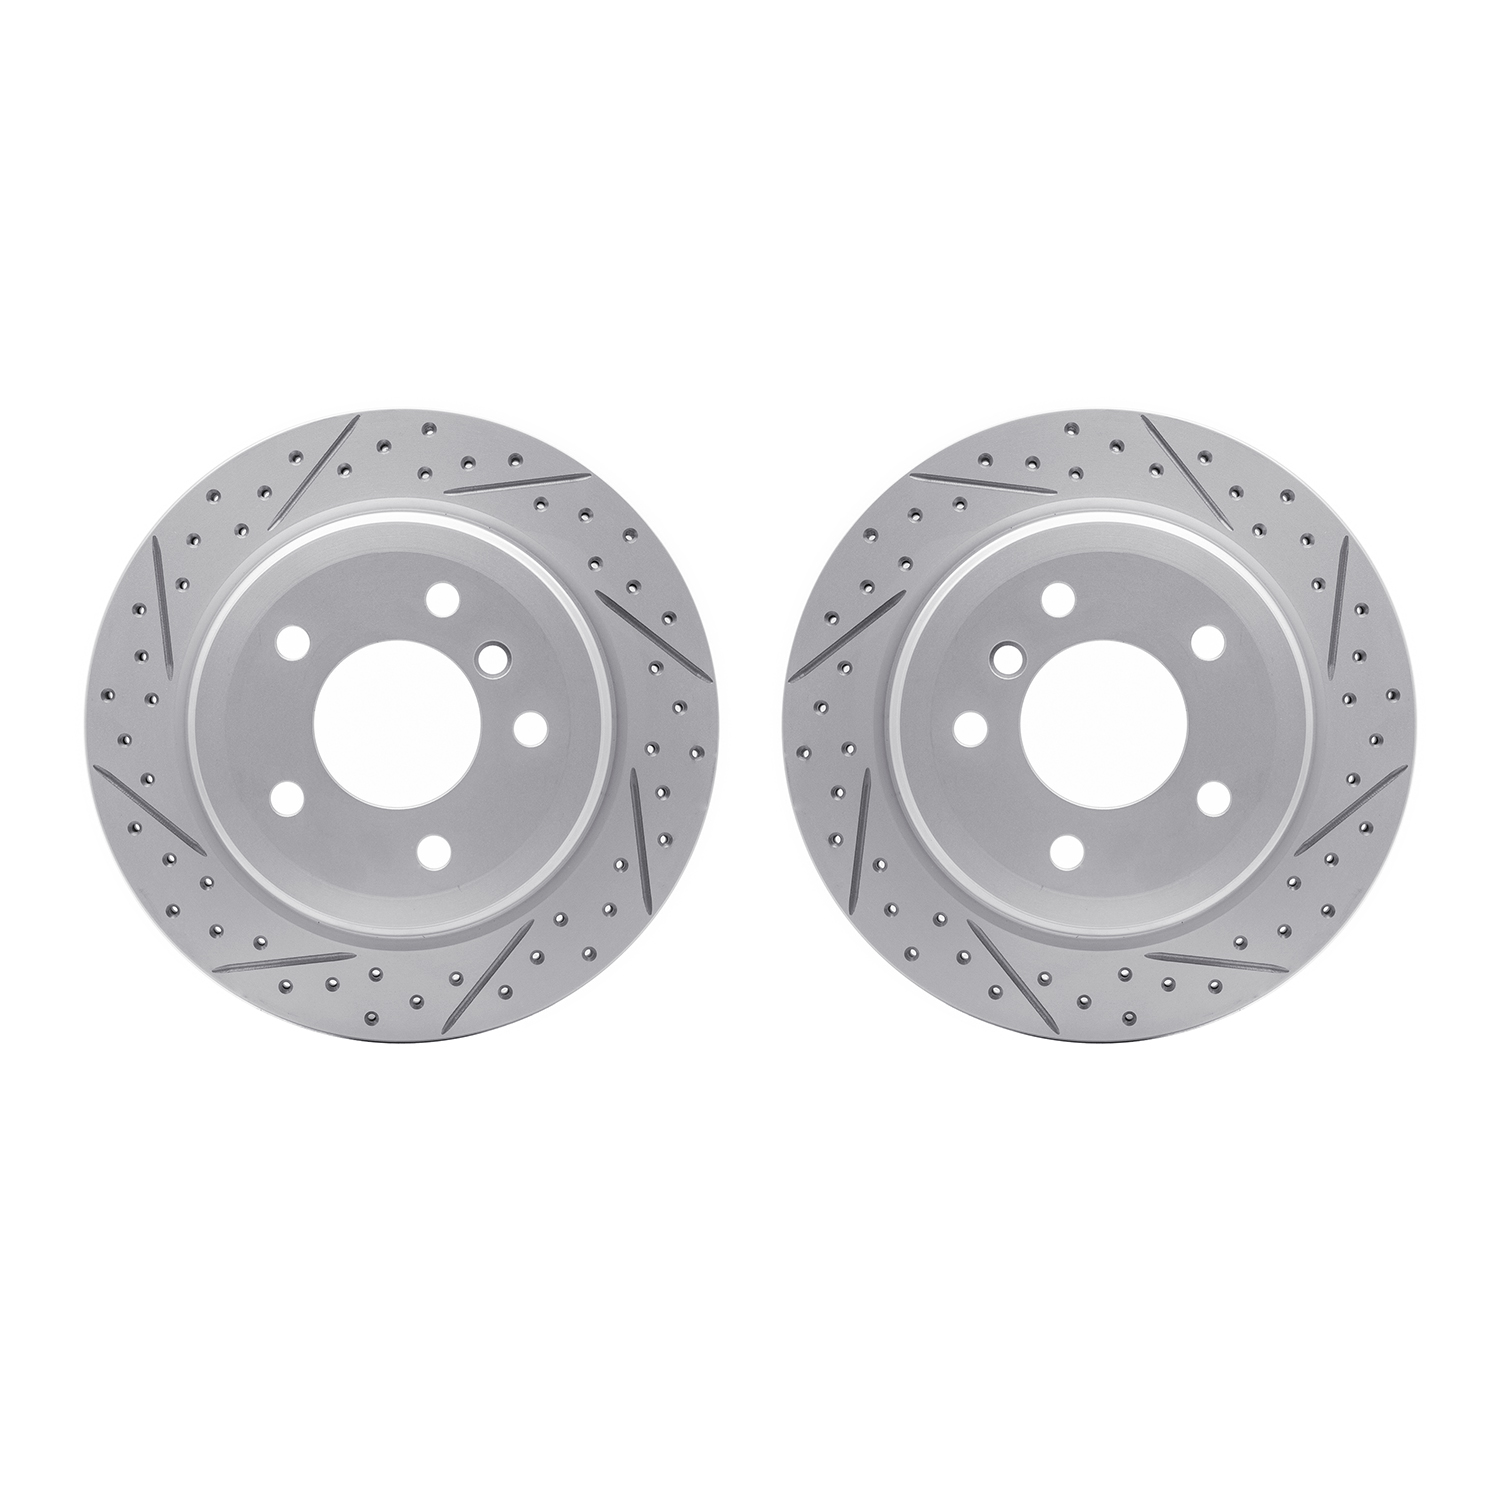 2002-31067 Geoperformance Drilled/Slotted Brake Rotors, 2006-2015 BMW, Position: Rear